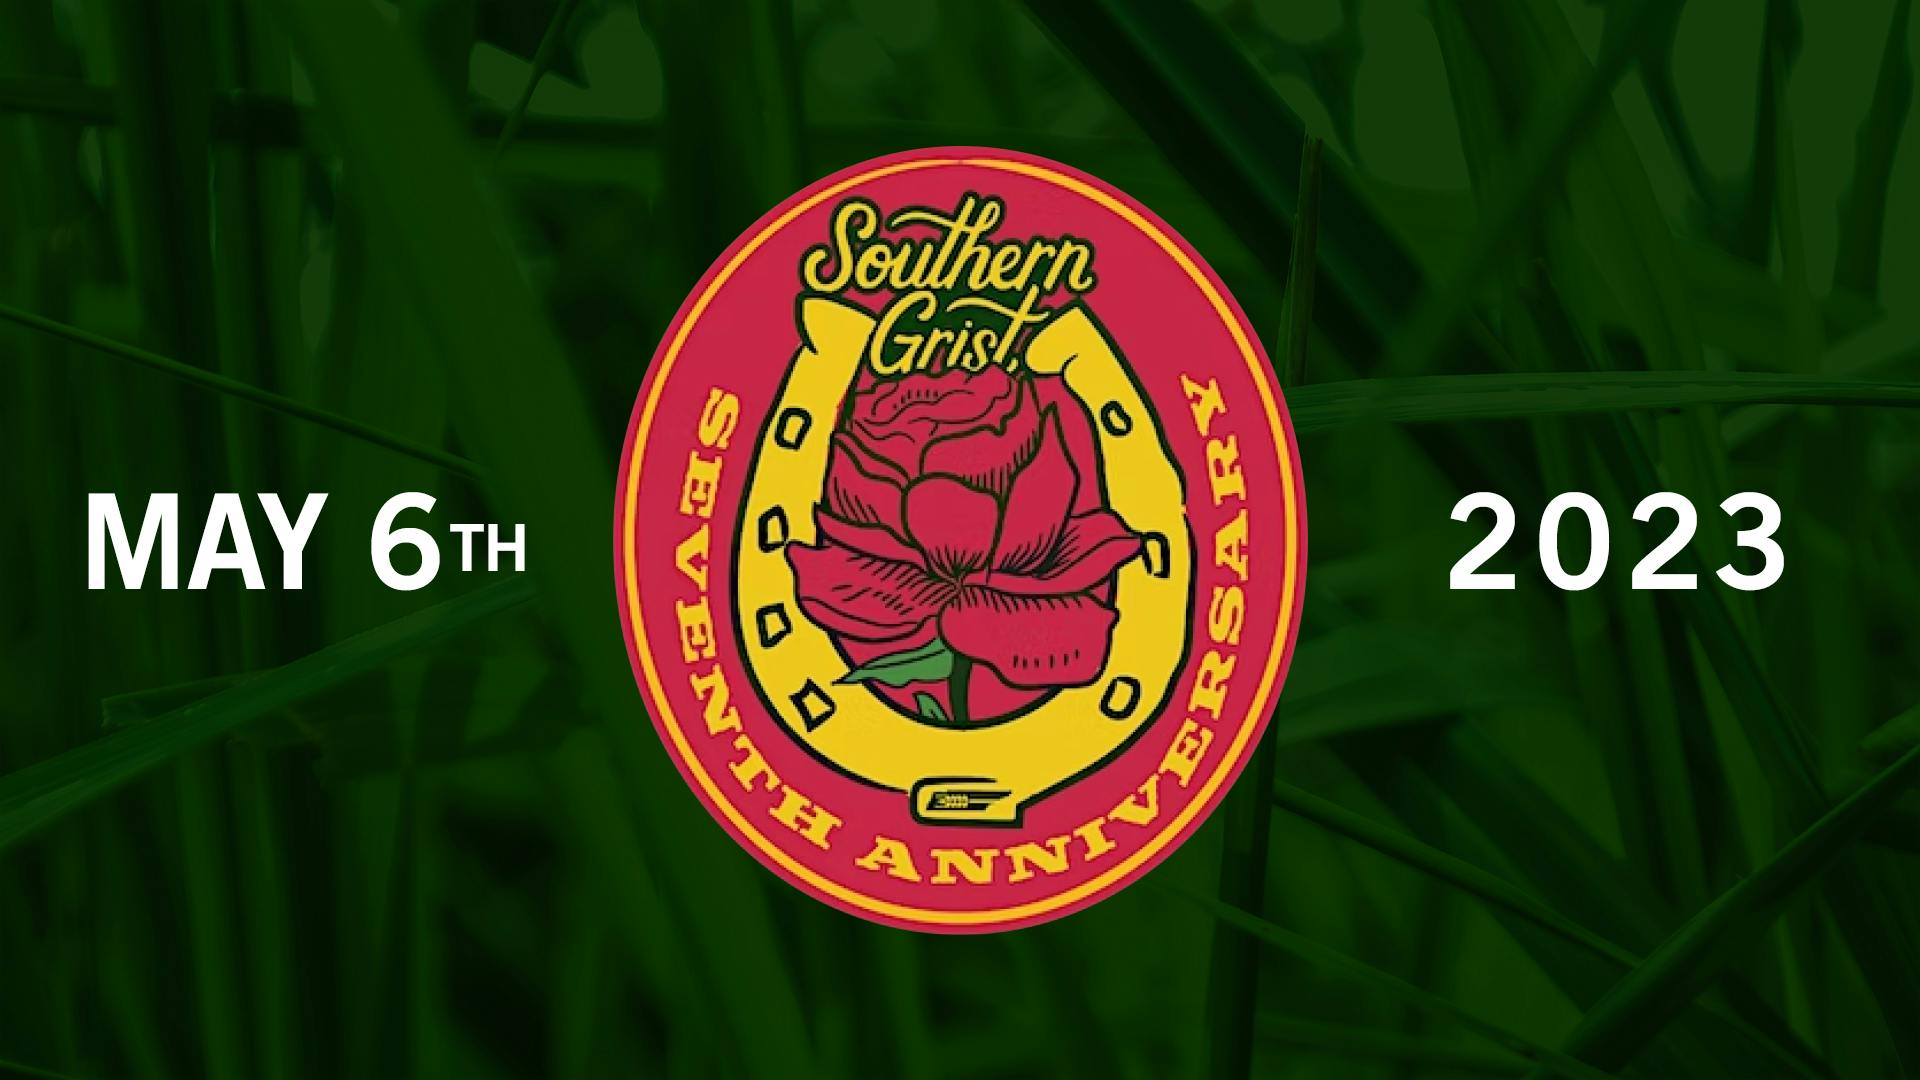 Southern-Grist-7th-Anniversary-Banner